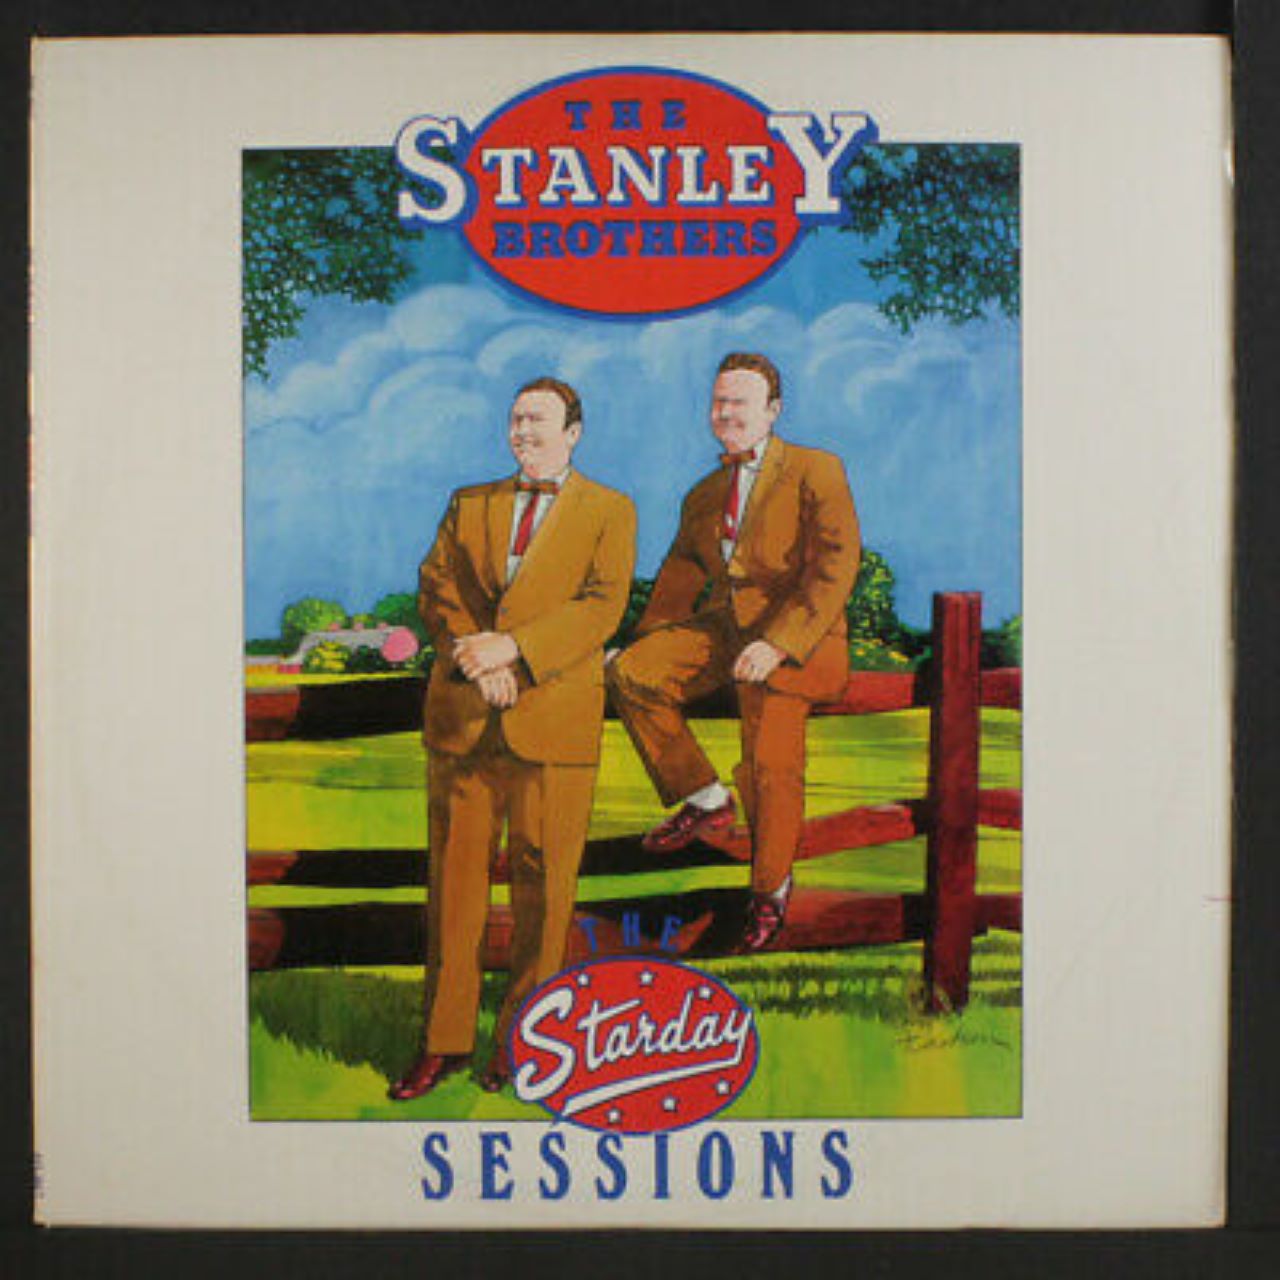 Stanley Brothers - The Starday Sessions cover album